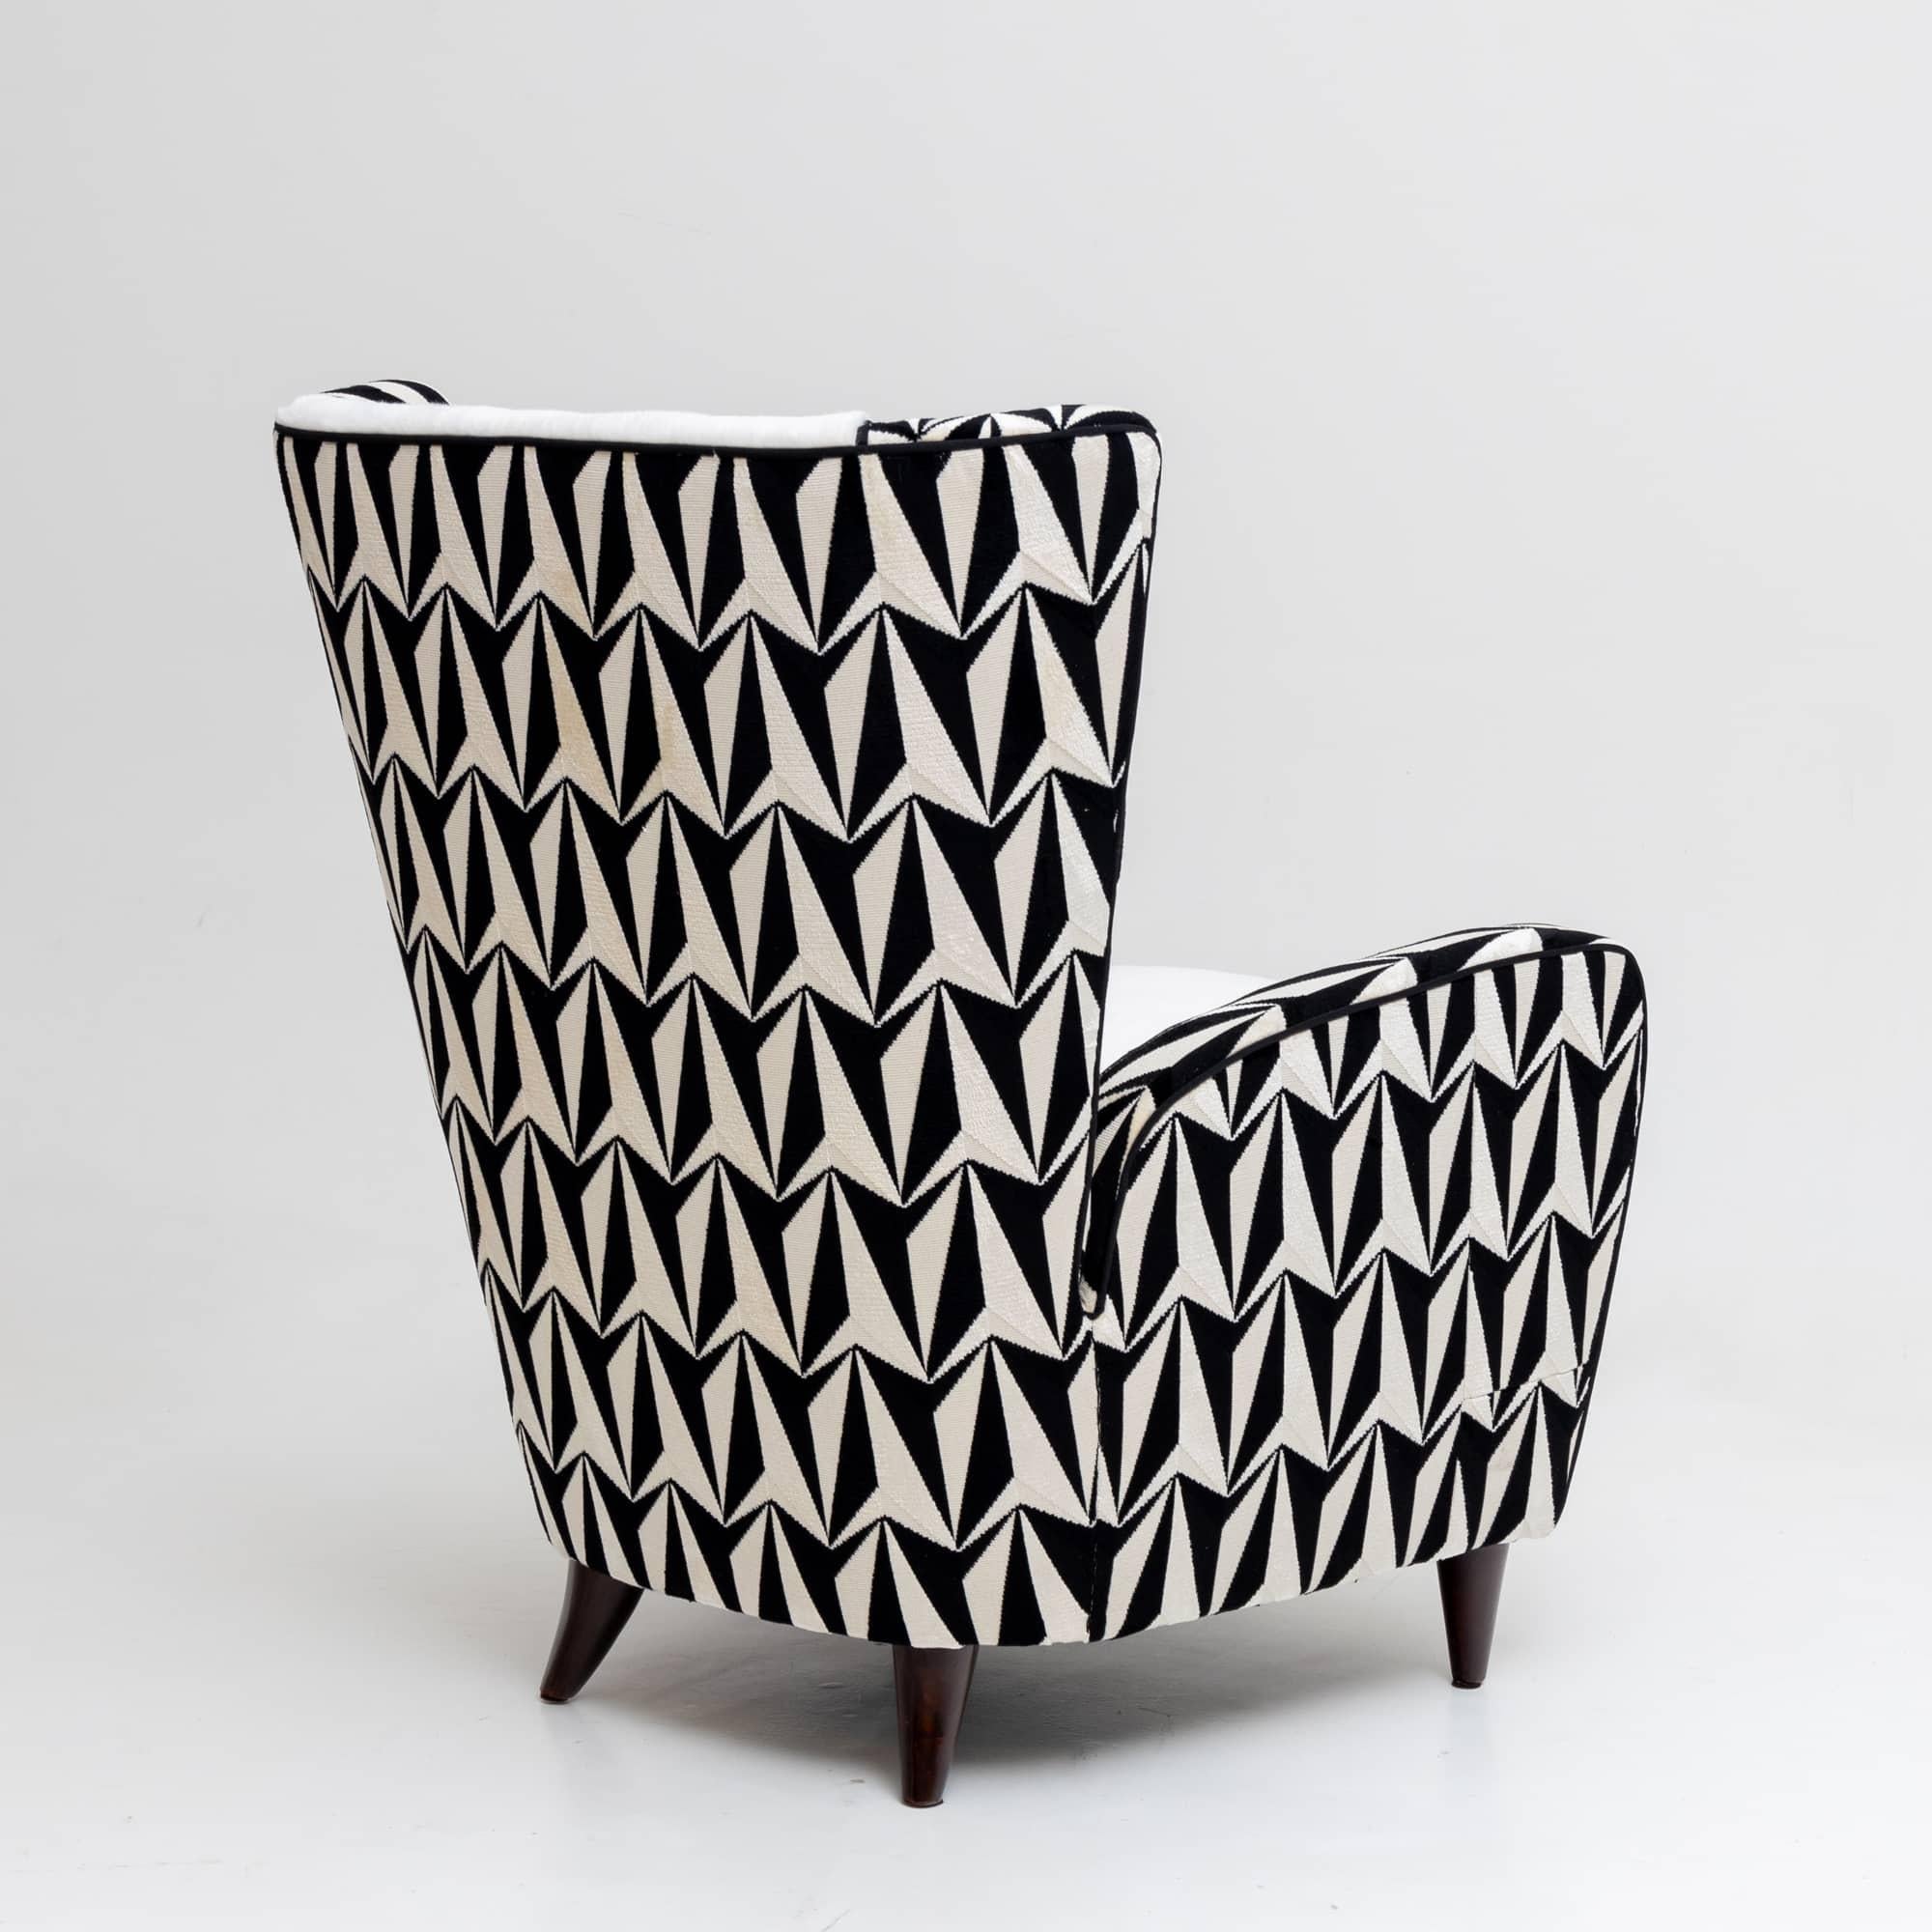 Pair of lounge armchairs with large trapezoidal backrests on conical legs. The armchairs have been reupholstered and covered with a high-quality black and white patterned fabric. The seat cushion and the backrest are covered with a white faux fur